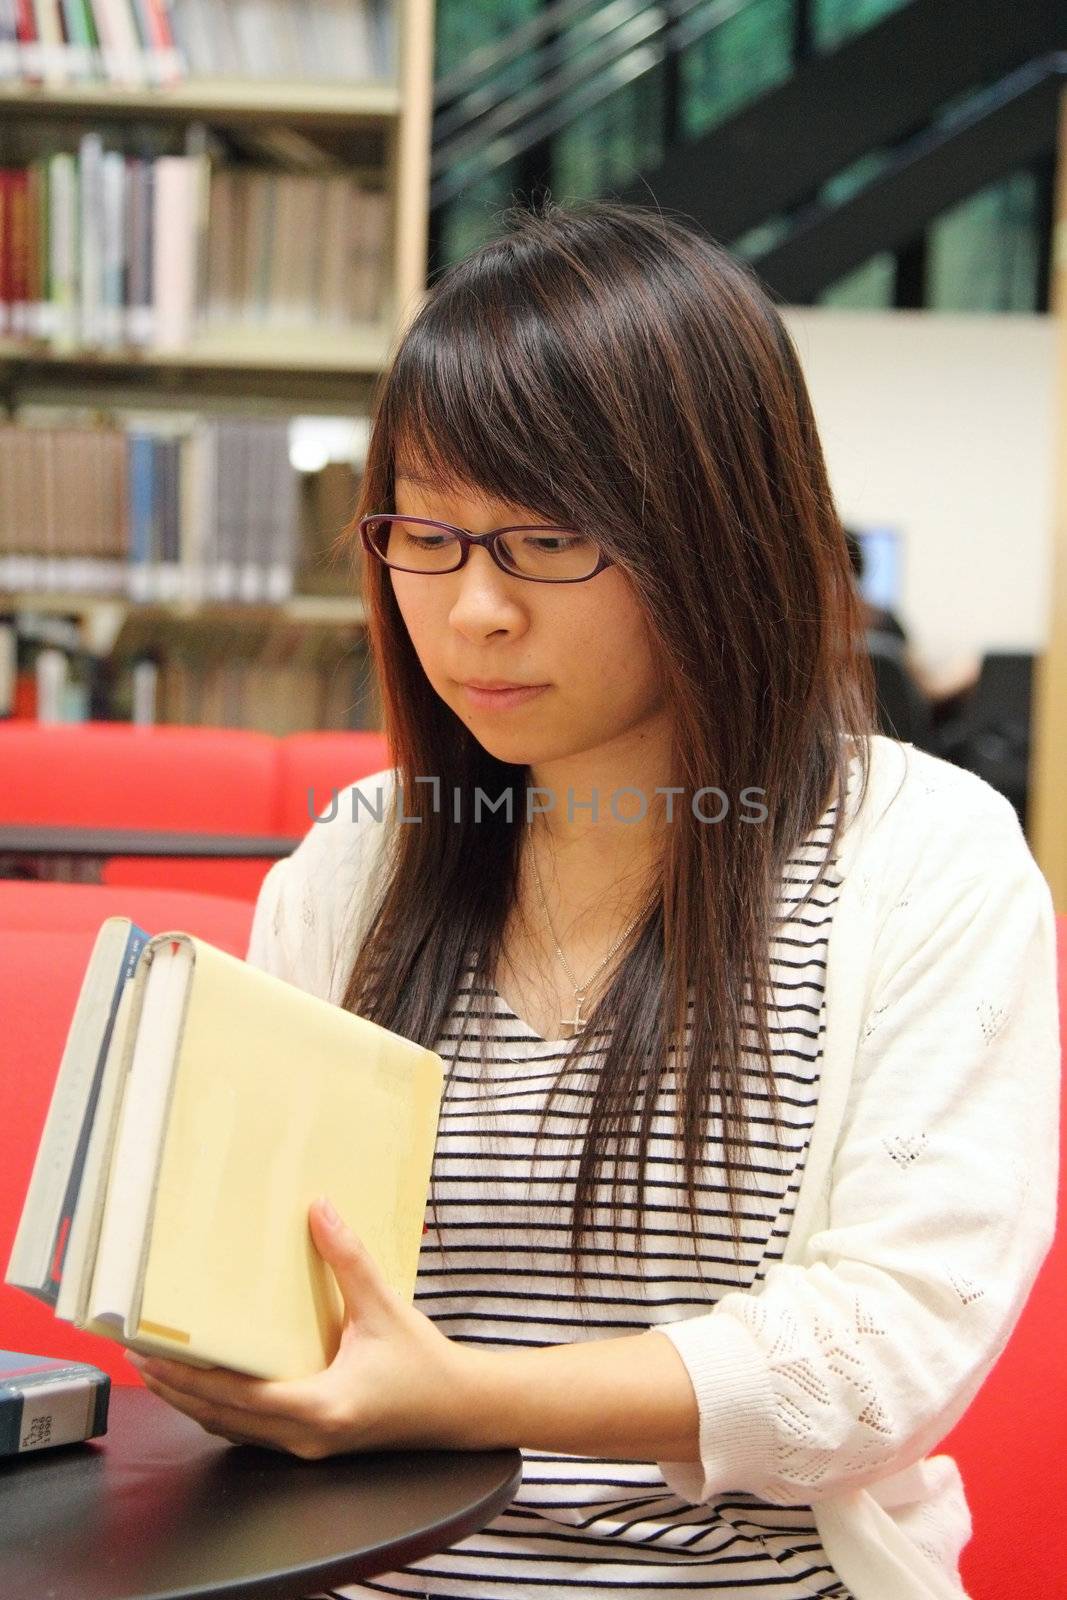 Asian girl student in library